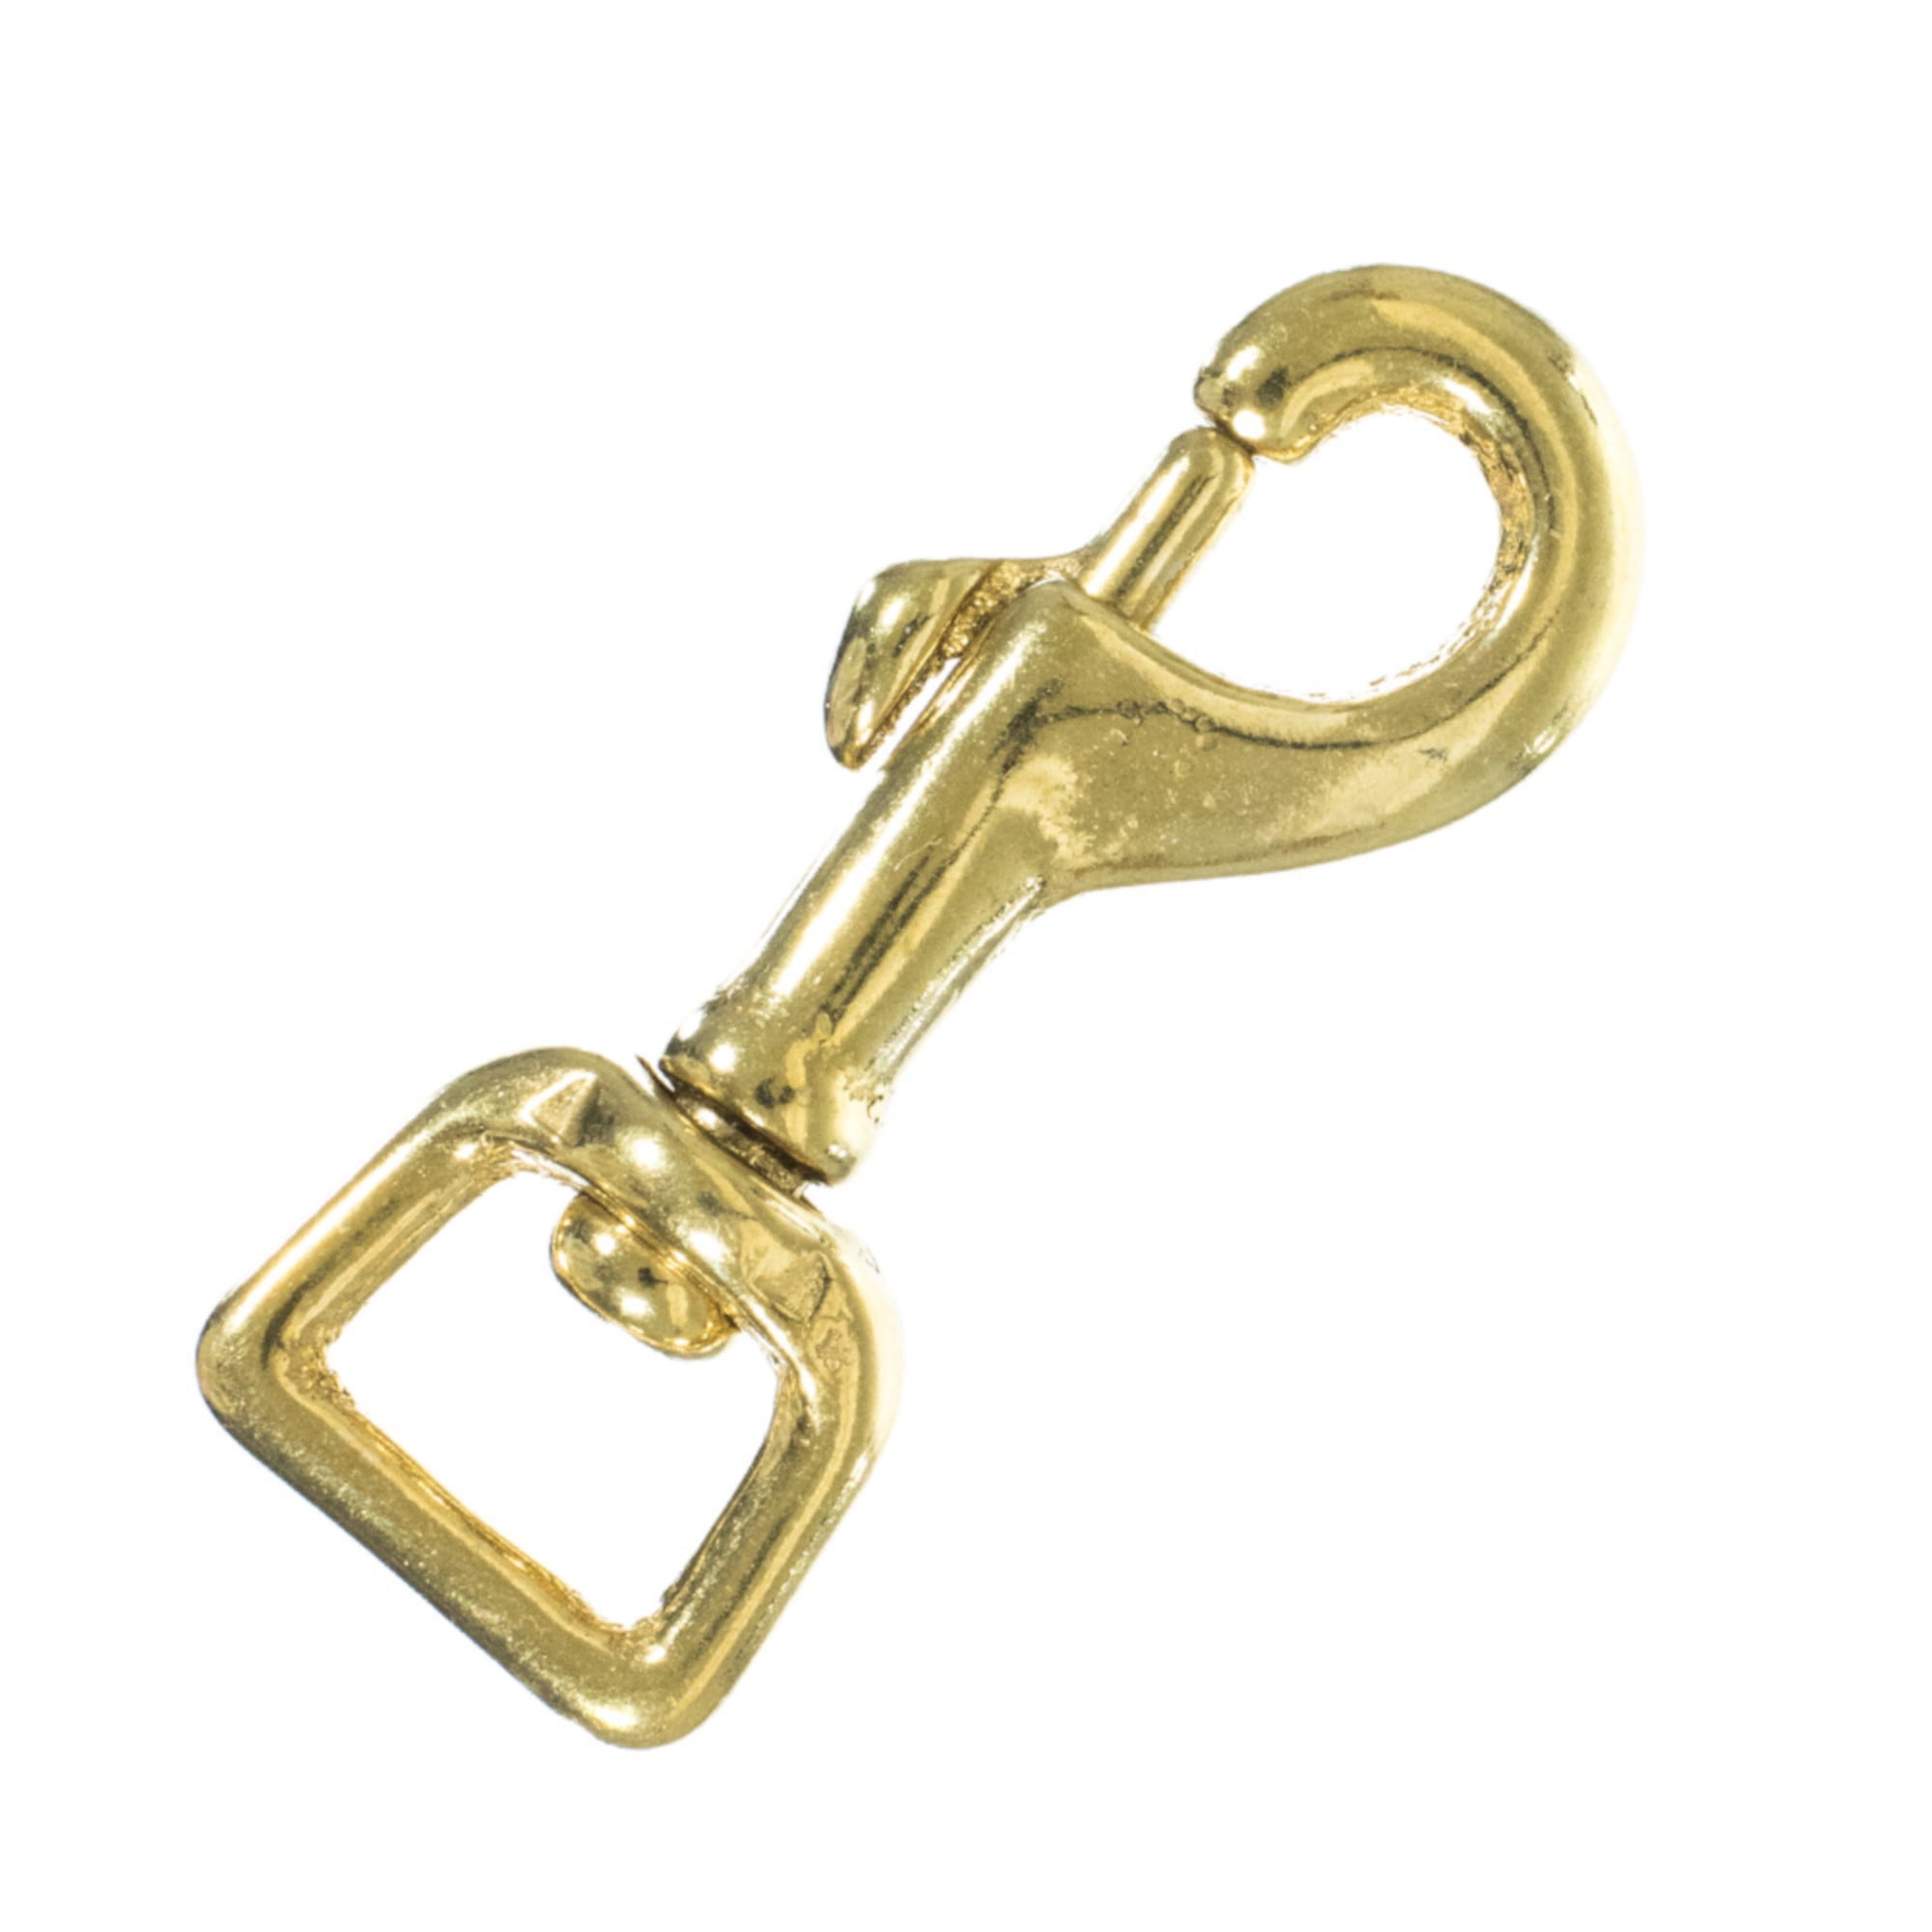 2pcs Solid Brass Square Eye Swivel Snap Hooks 3 sizes available 